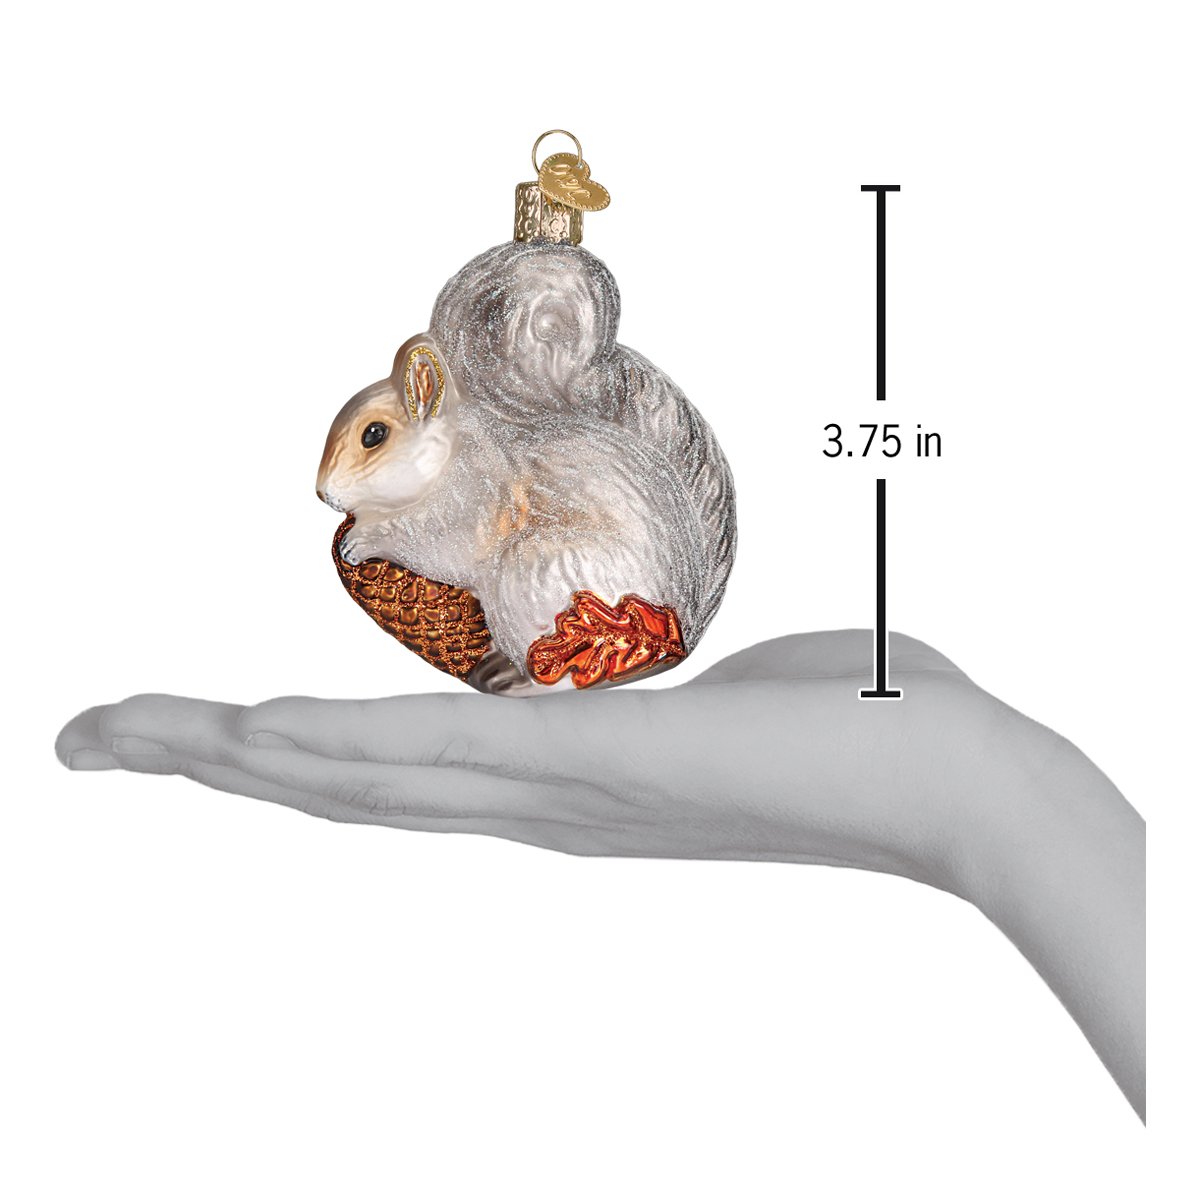 Hungry Squirrel Ornament